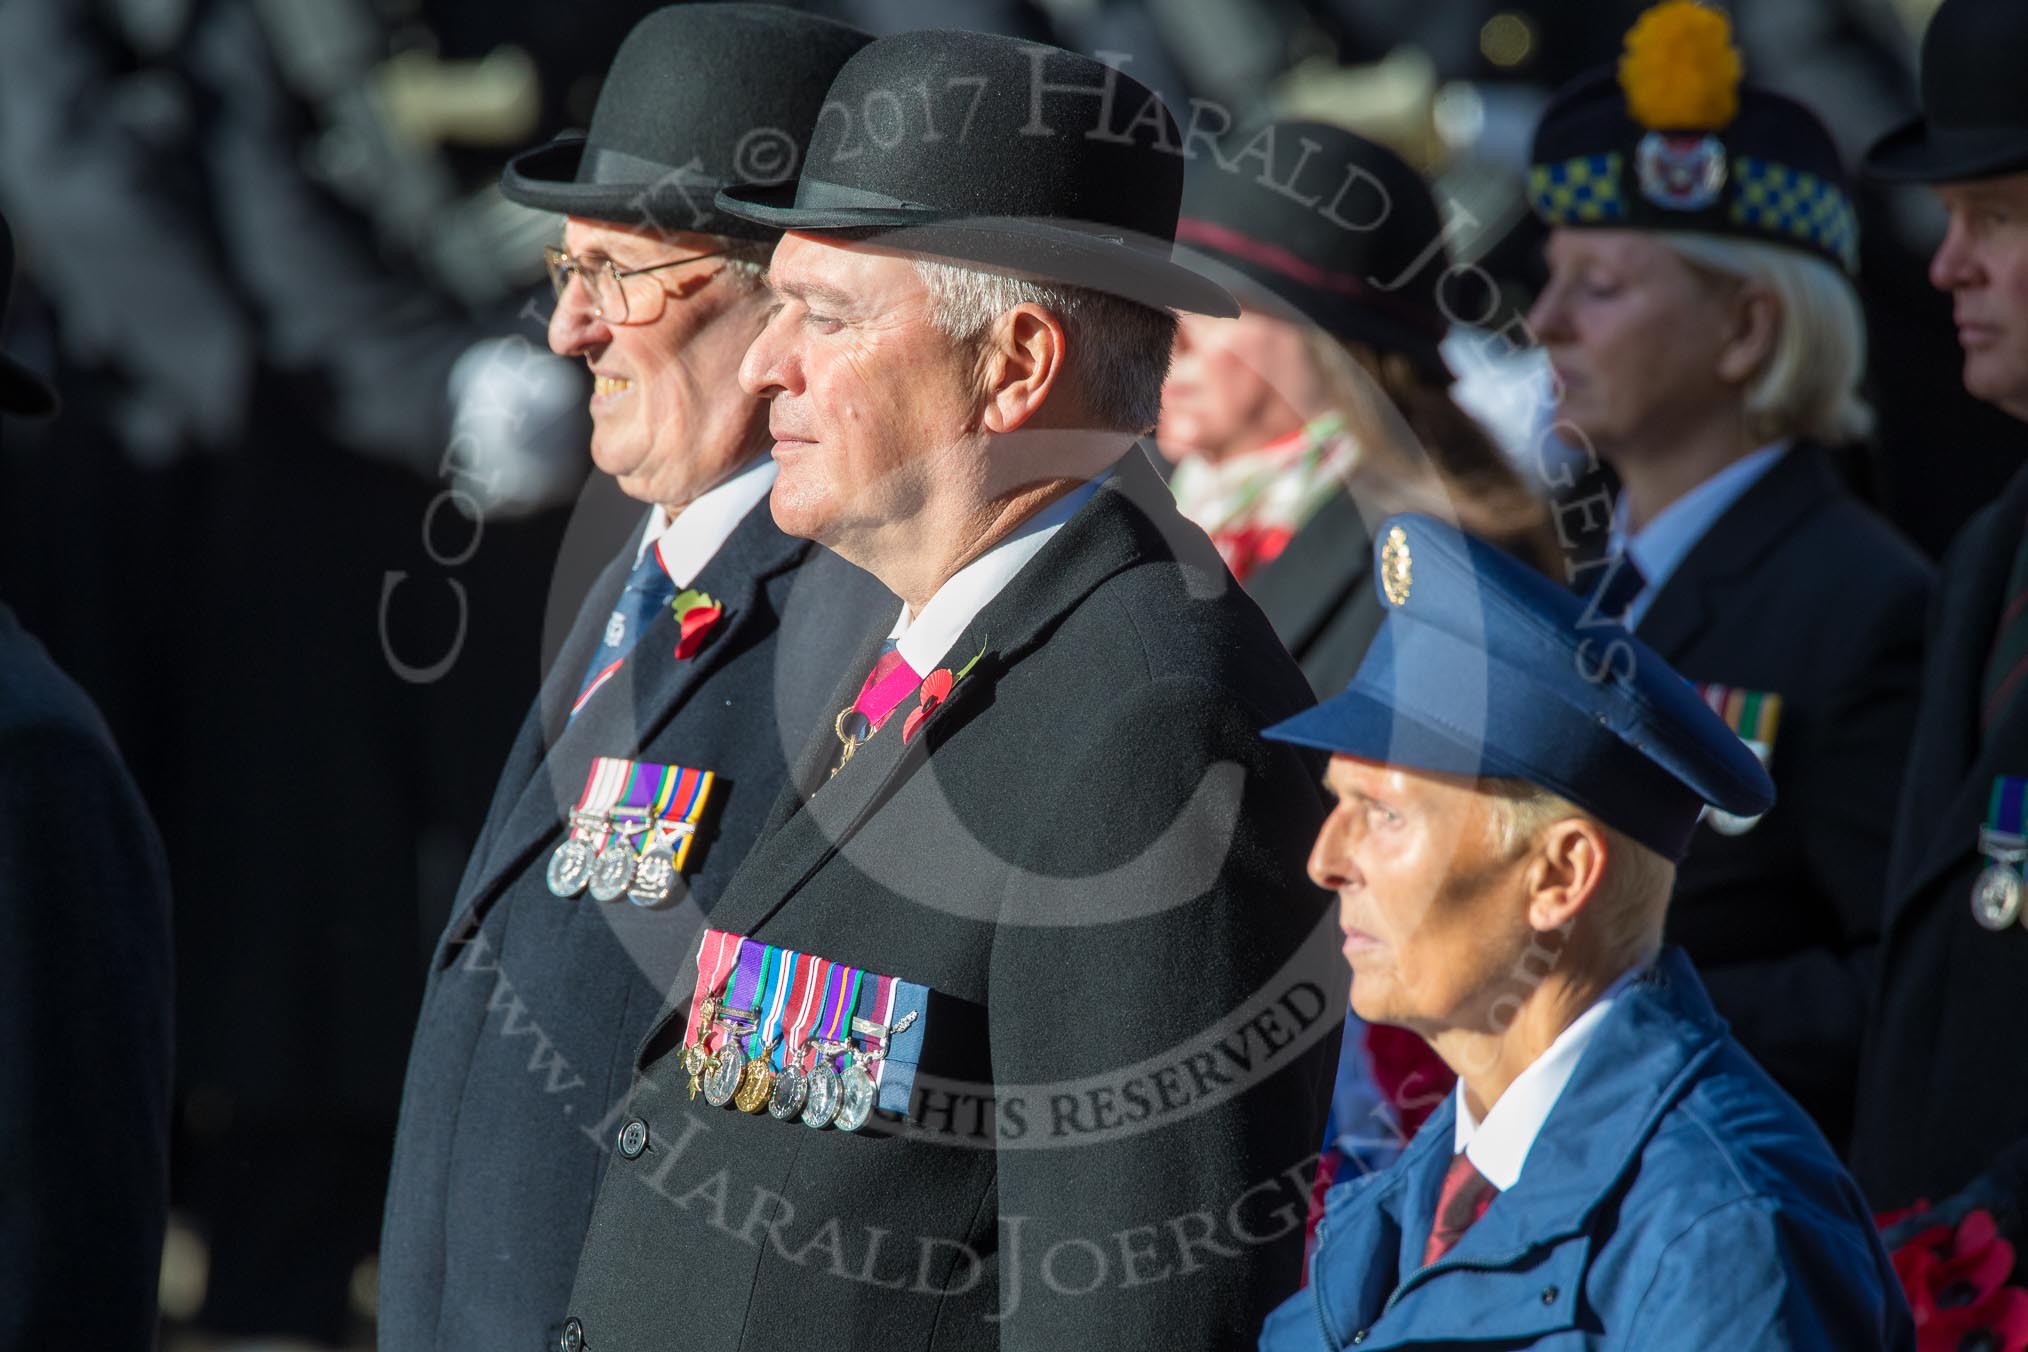 during Remembrance Sunday Cenotaph Ceremony 2018 at Horse Guards Parade, Westminster, London, 11 November 2018, 11:28.